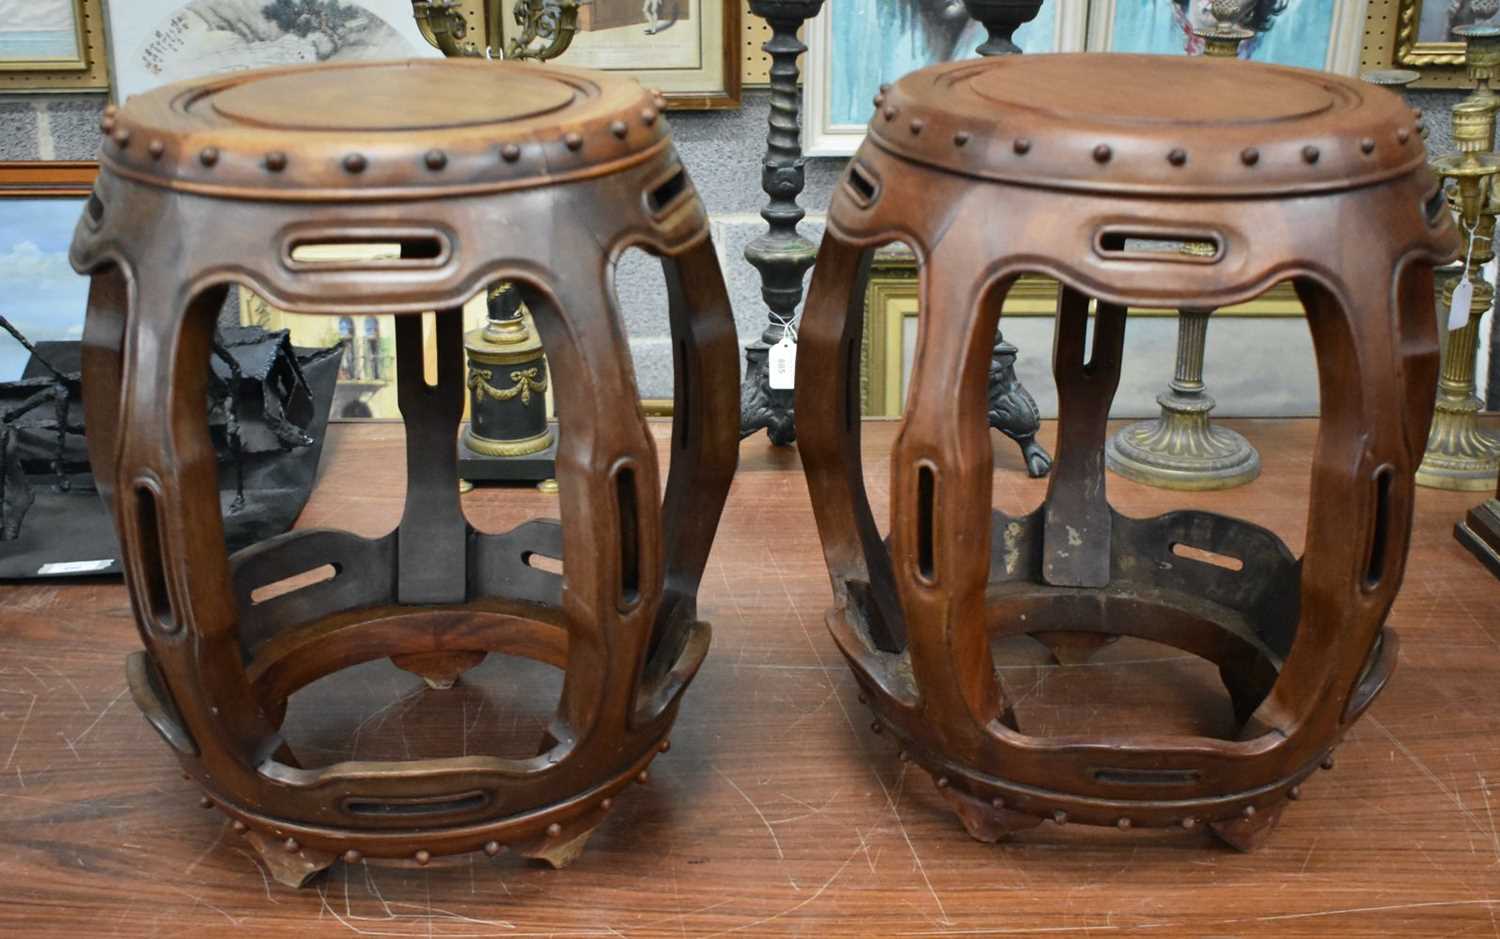 A PAIR OF EARLY 20TH CENTURY CHINESE HARDWOOD DRUM STOOLS. 45cm x 30cm.